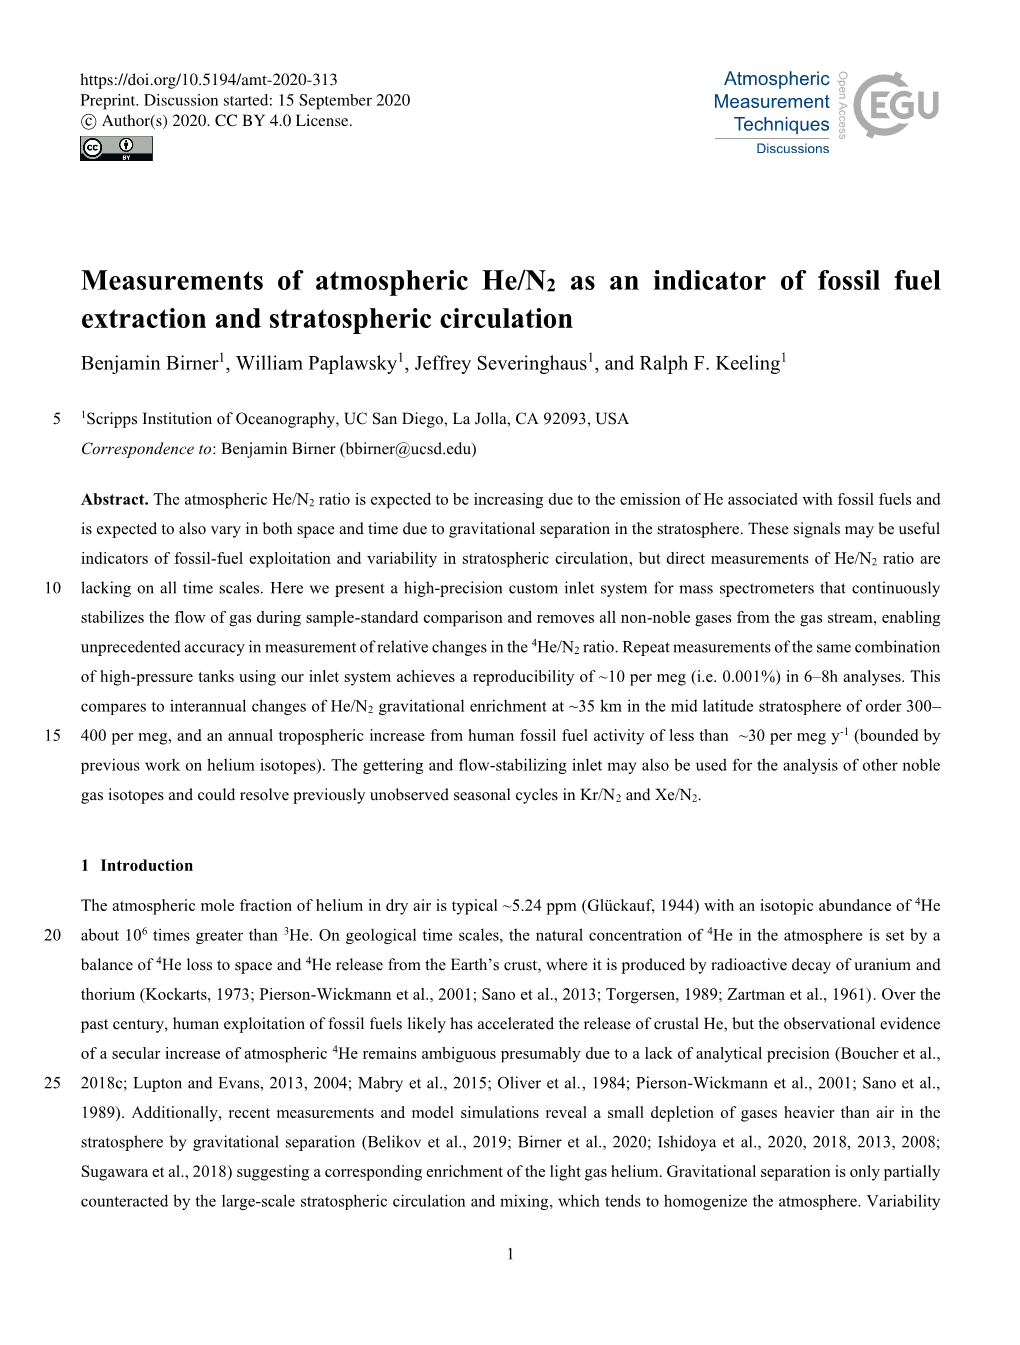 Measurements of Atmospheric He/N2 As an Indicator of Fossil Fuel